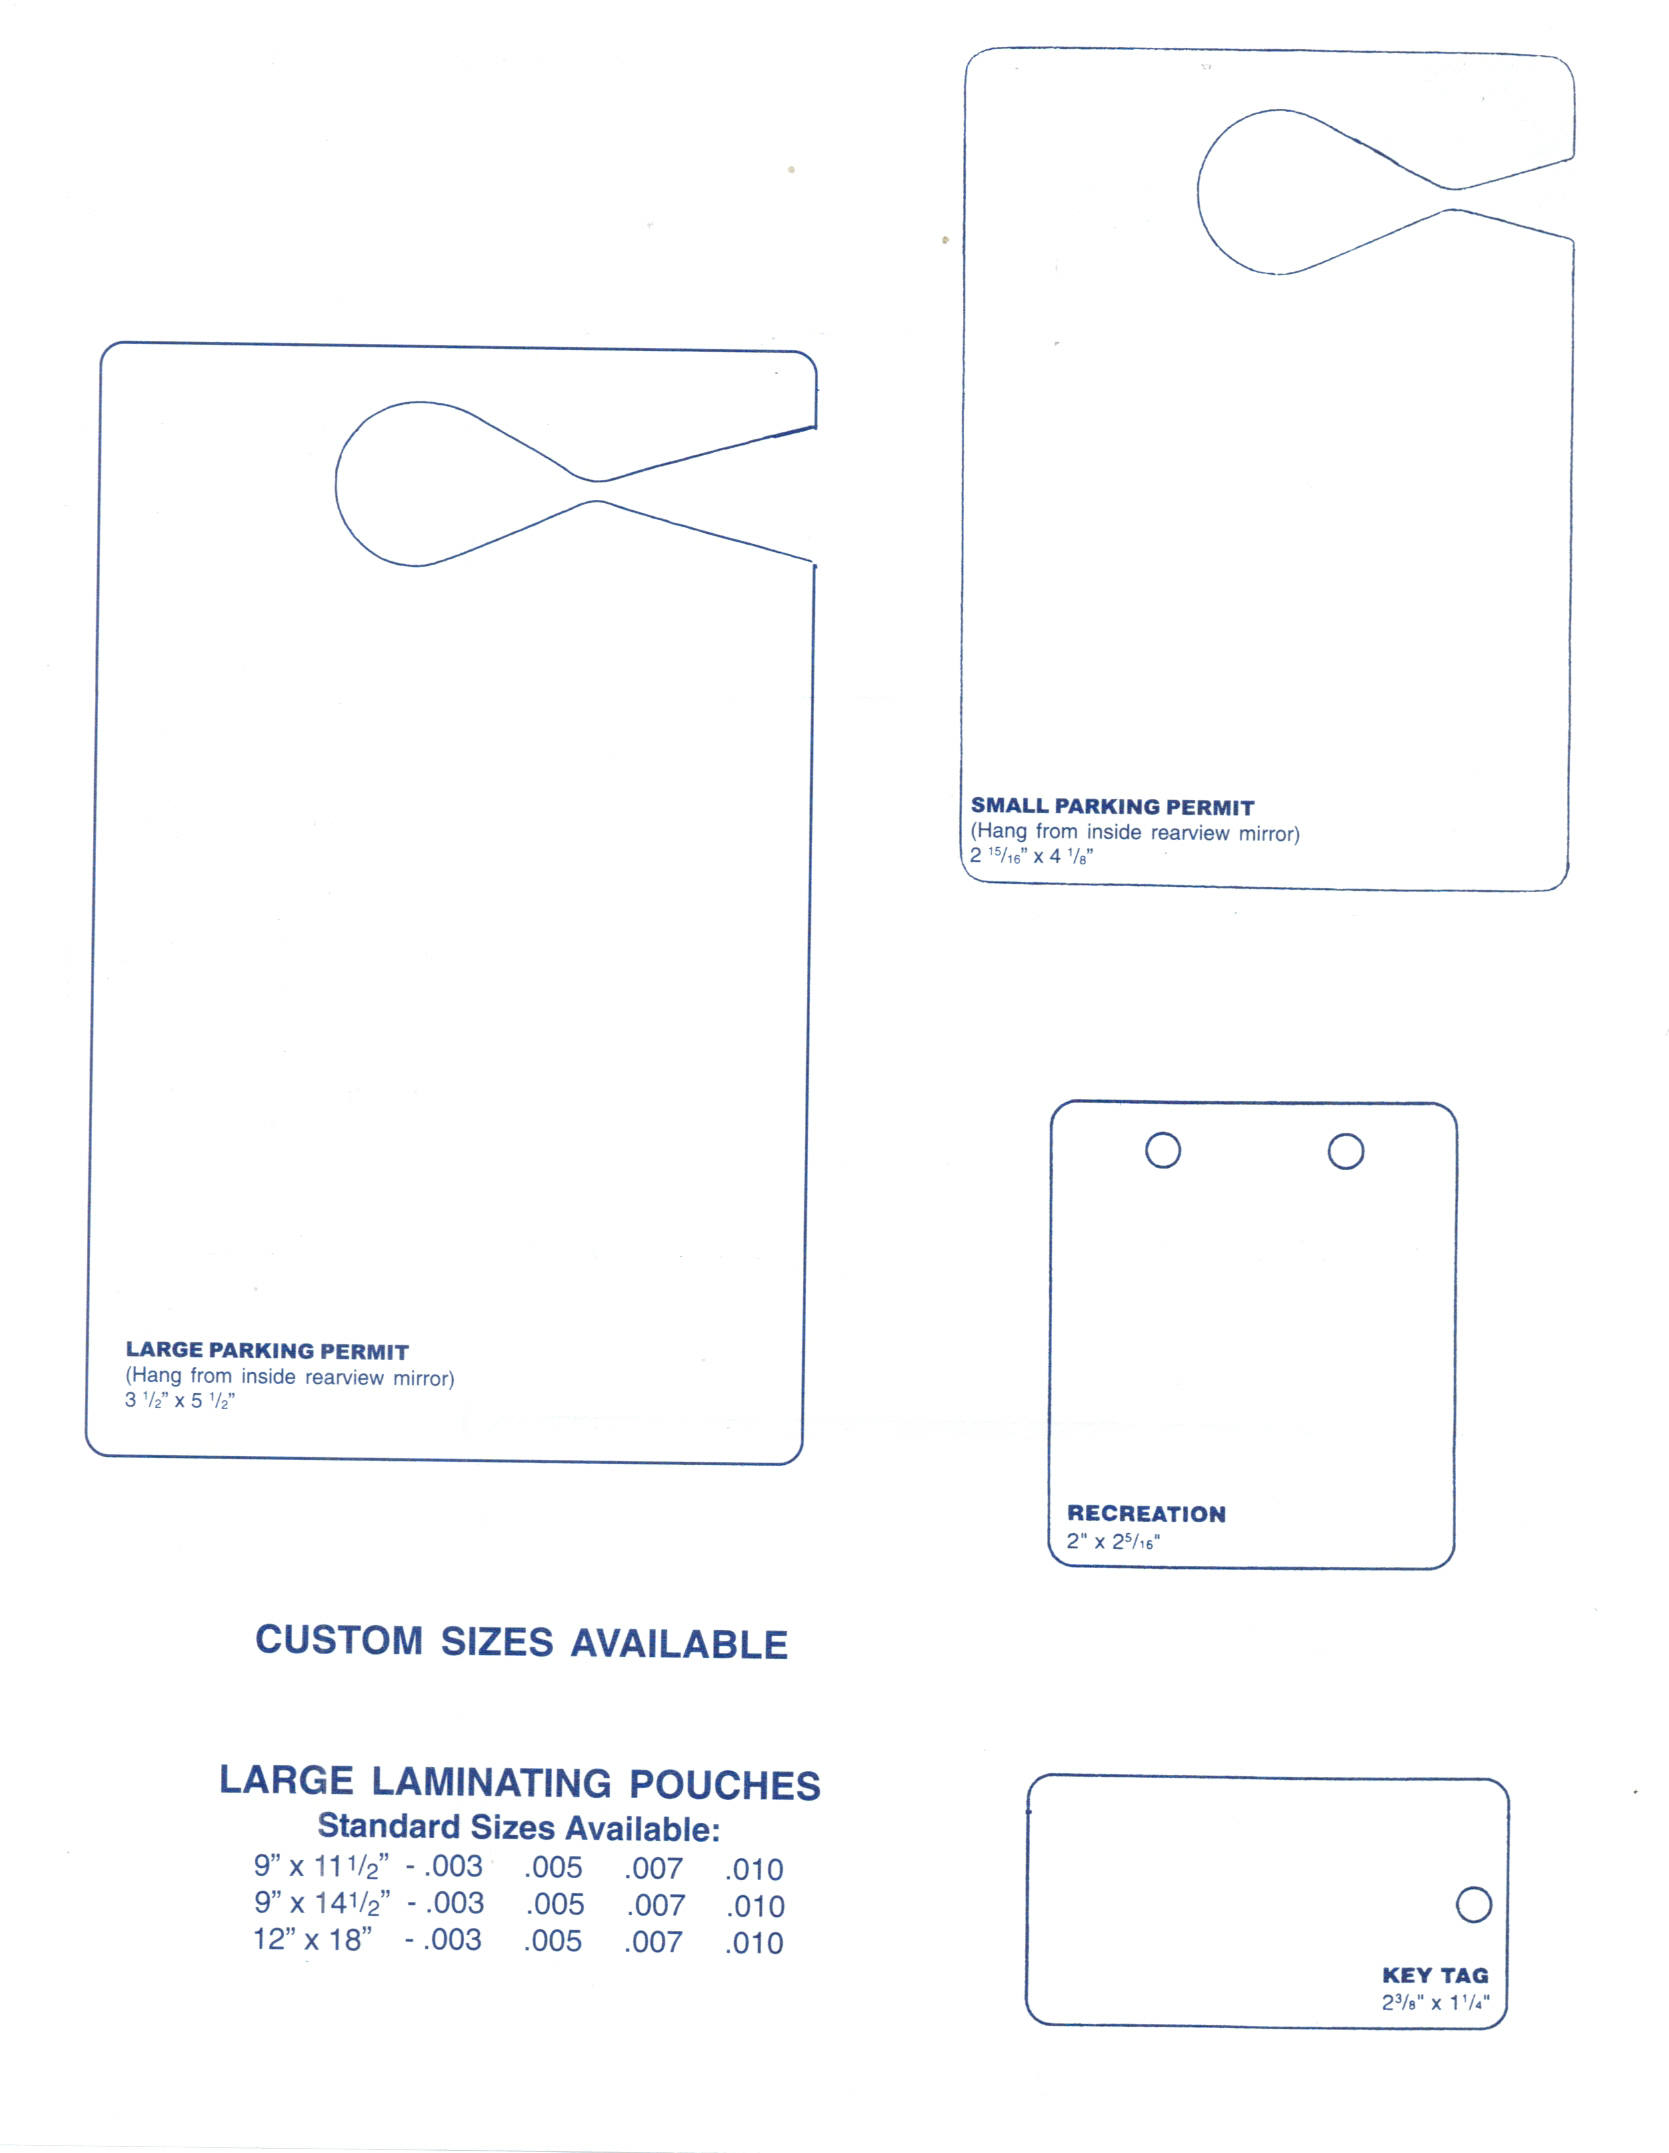 Laminate SIze Sheet – Back | Gill ID Card Printers & Identification Systems